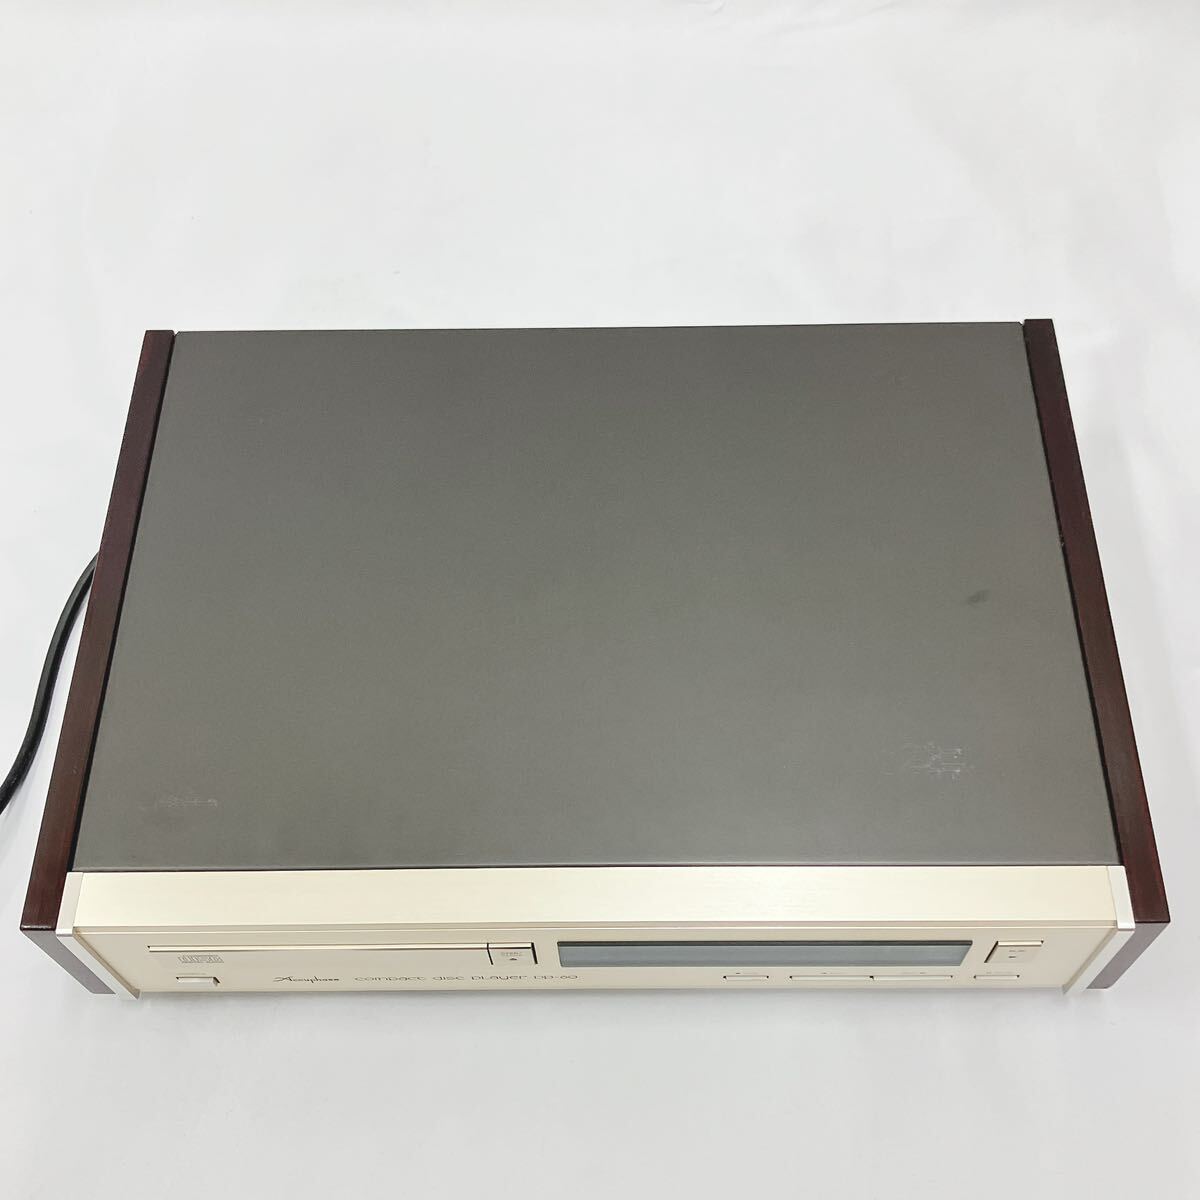 Accuphase Accuphase CD player DP-60 audio equipment remote control manual attaching addition photograph equipped 01-0315